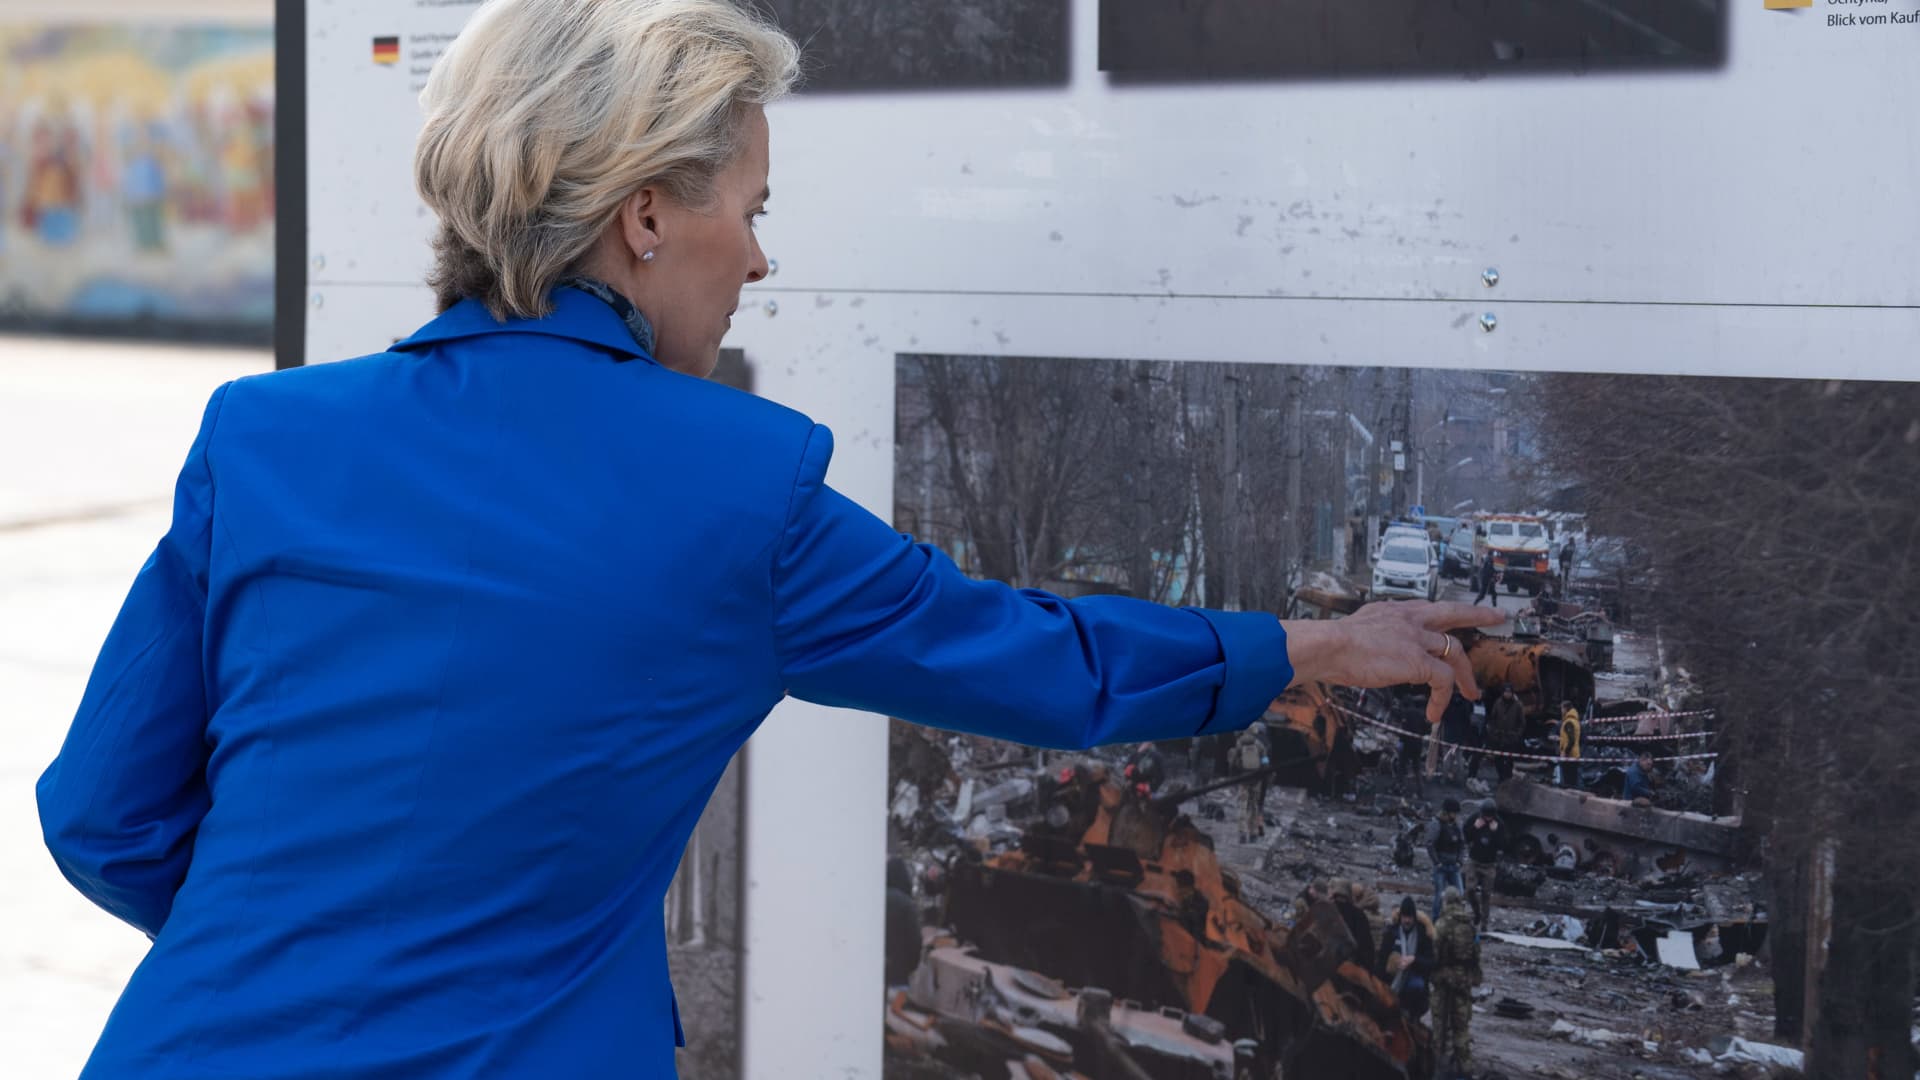 Ursula von der Leyen, president of the European Commission, visits a display of destroyed Russian military vehicles and war photography in Kyiv, Ukraine, on Tuesday, May 9, 2023.